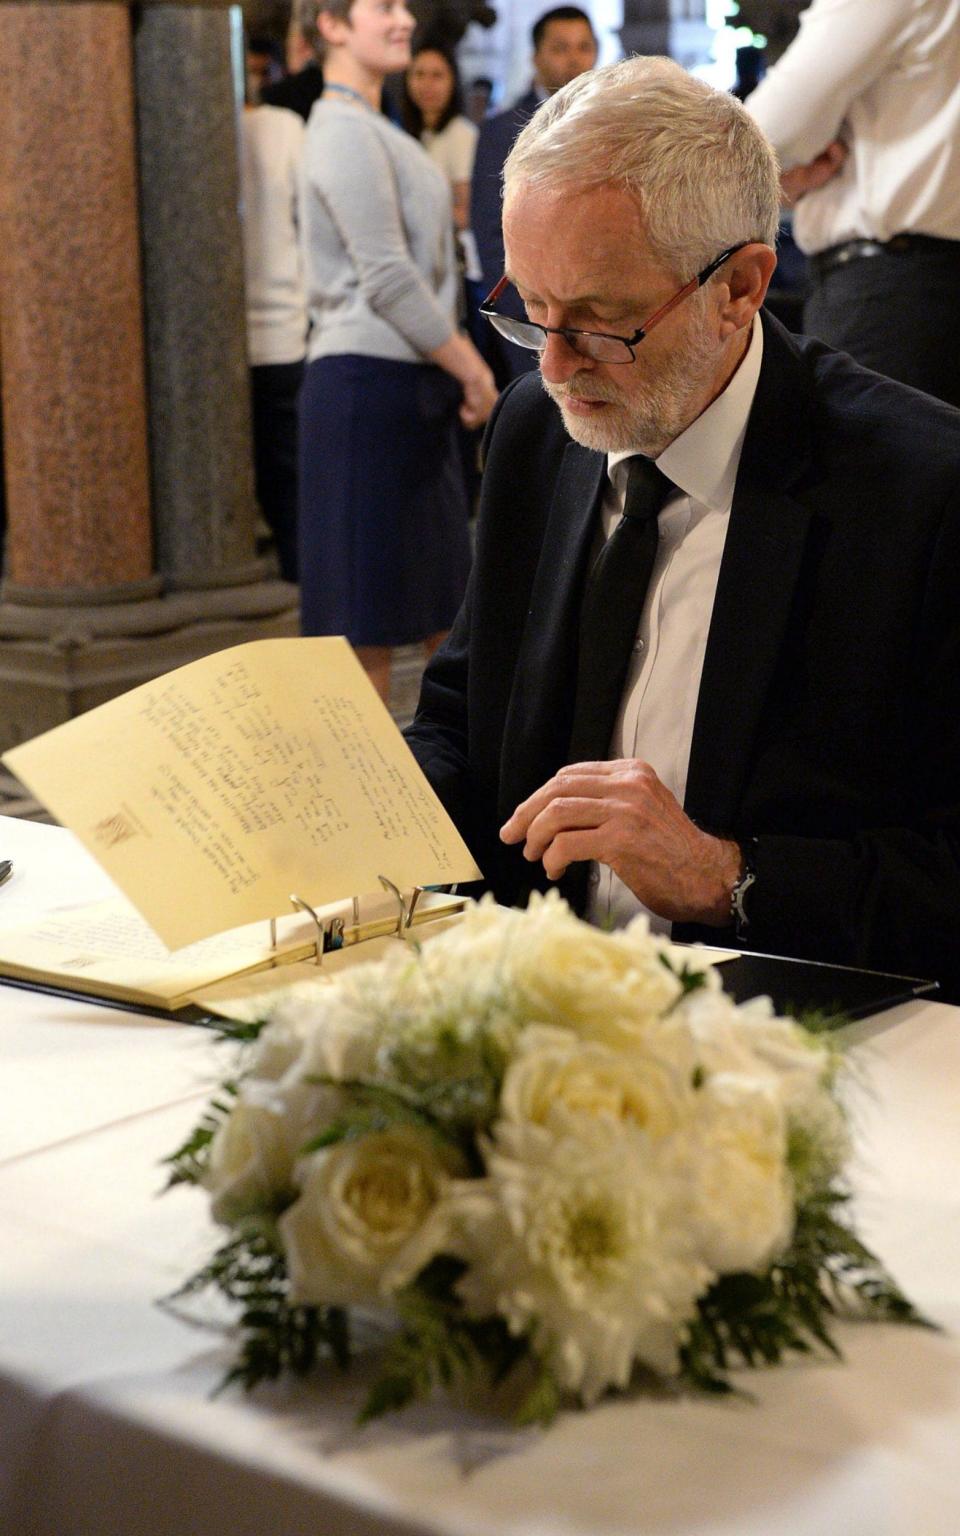 Labour leader Jeremy Corbyn signs a book of condolence at Manchester Town Hall - Credit: Ben Birchall/PA Wire